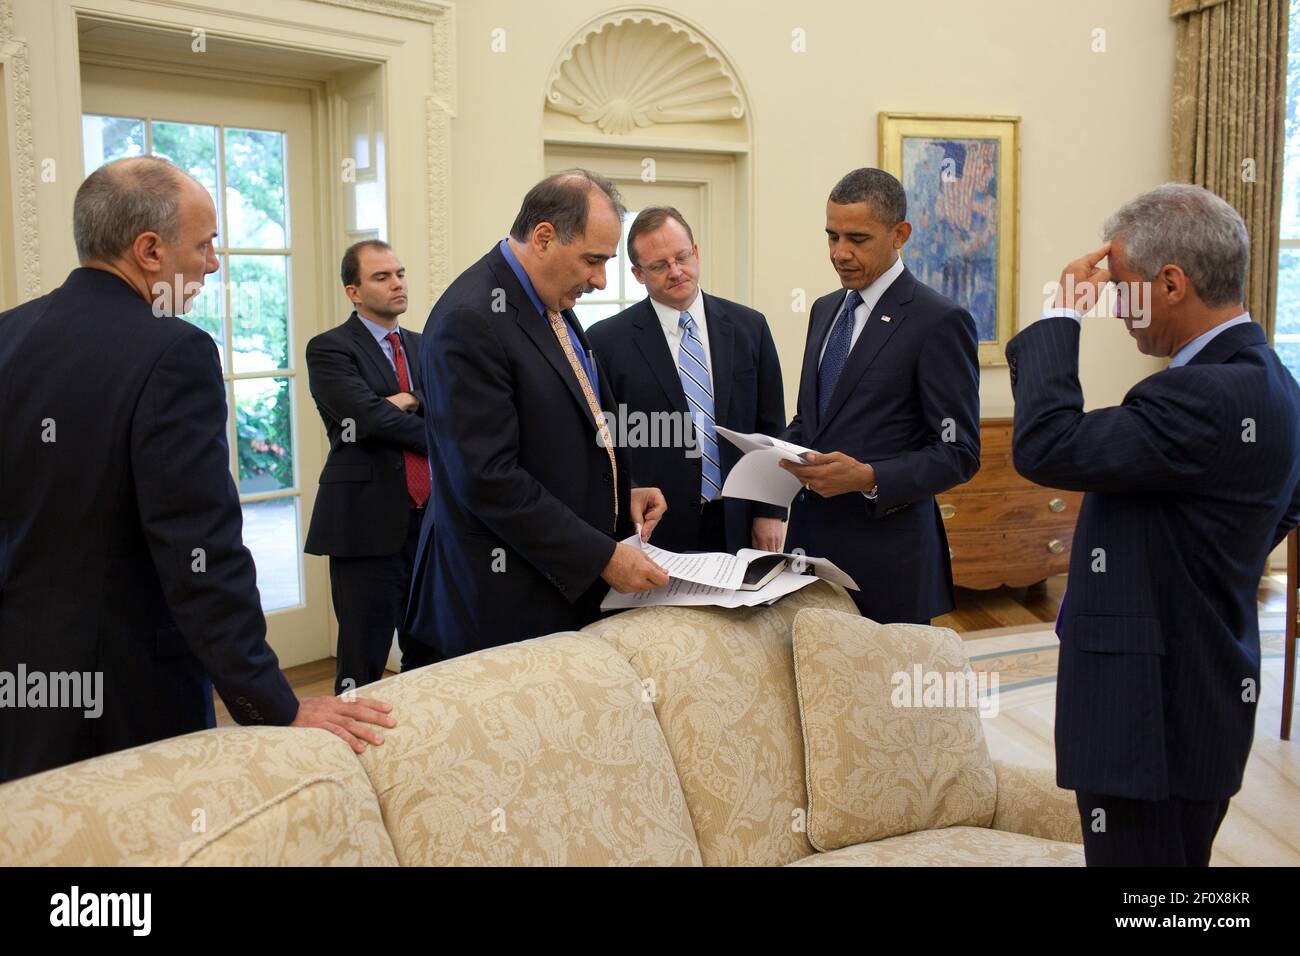 President Barack Obama talks with senior advisors in the Oval Office July 27, 2010. From left, are Phil Schiliro, Ben Rhodes, David Axelrod, Robert Gibbs, and Chief of Staff Rahm Emanuel Stock Photo